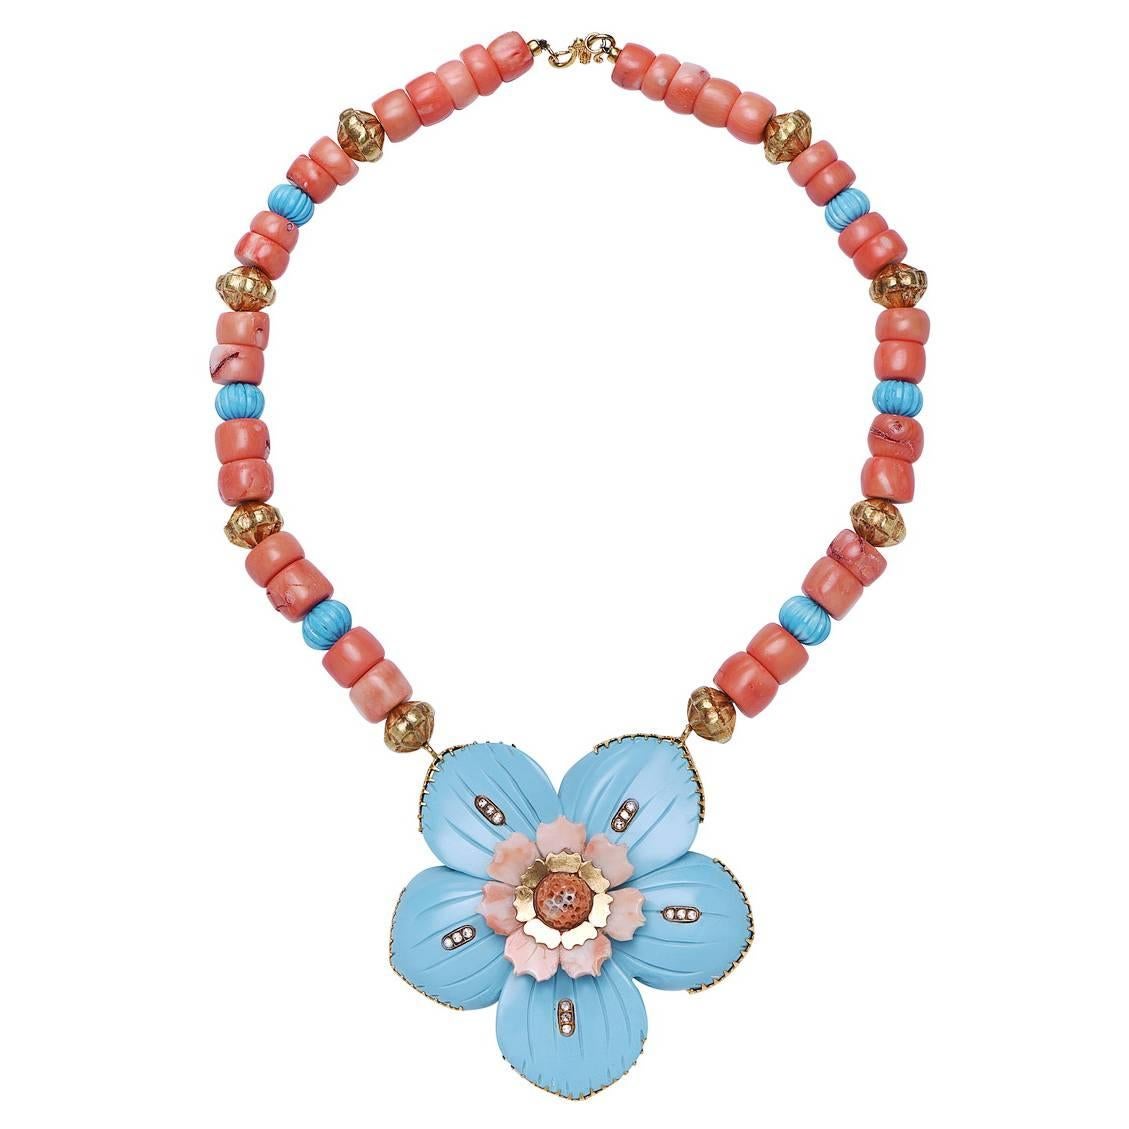 Hand-woven Turquoise Flower Necklace Bib Necklace Turquoise Necklace